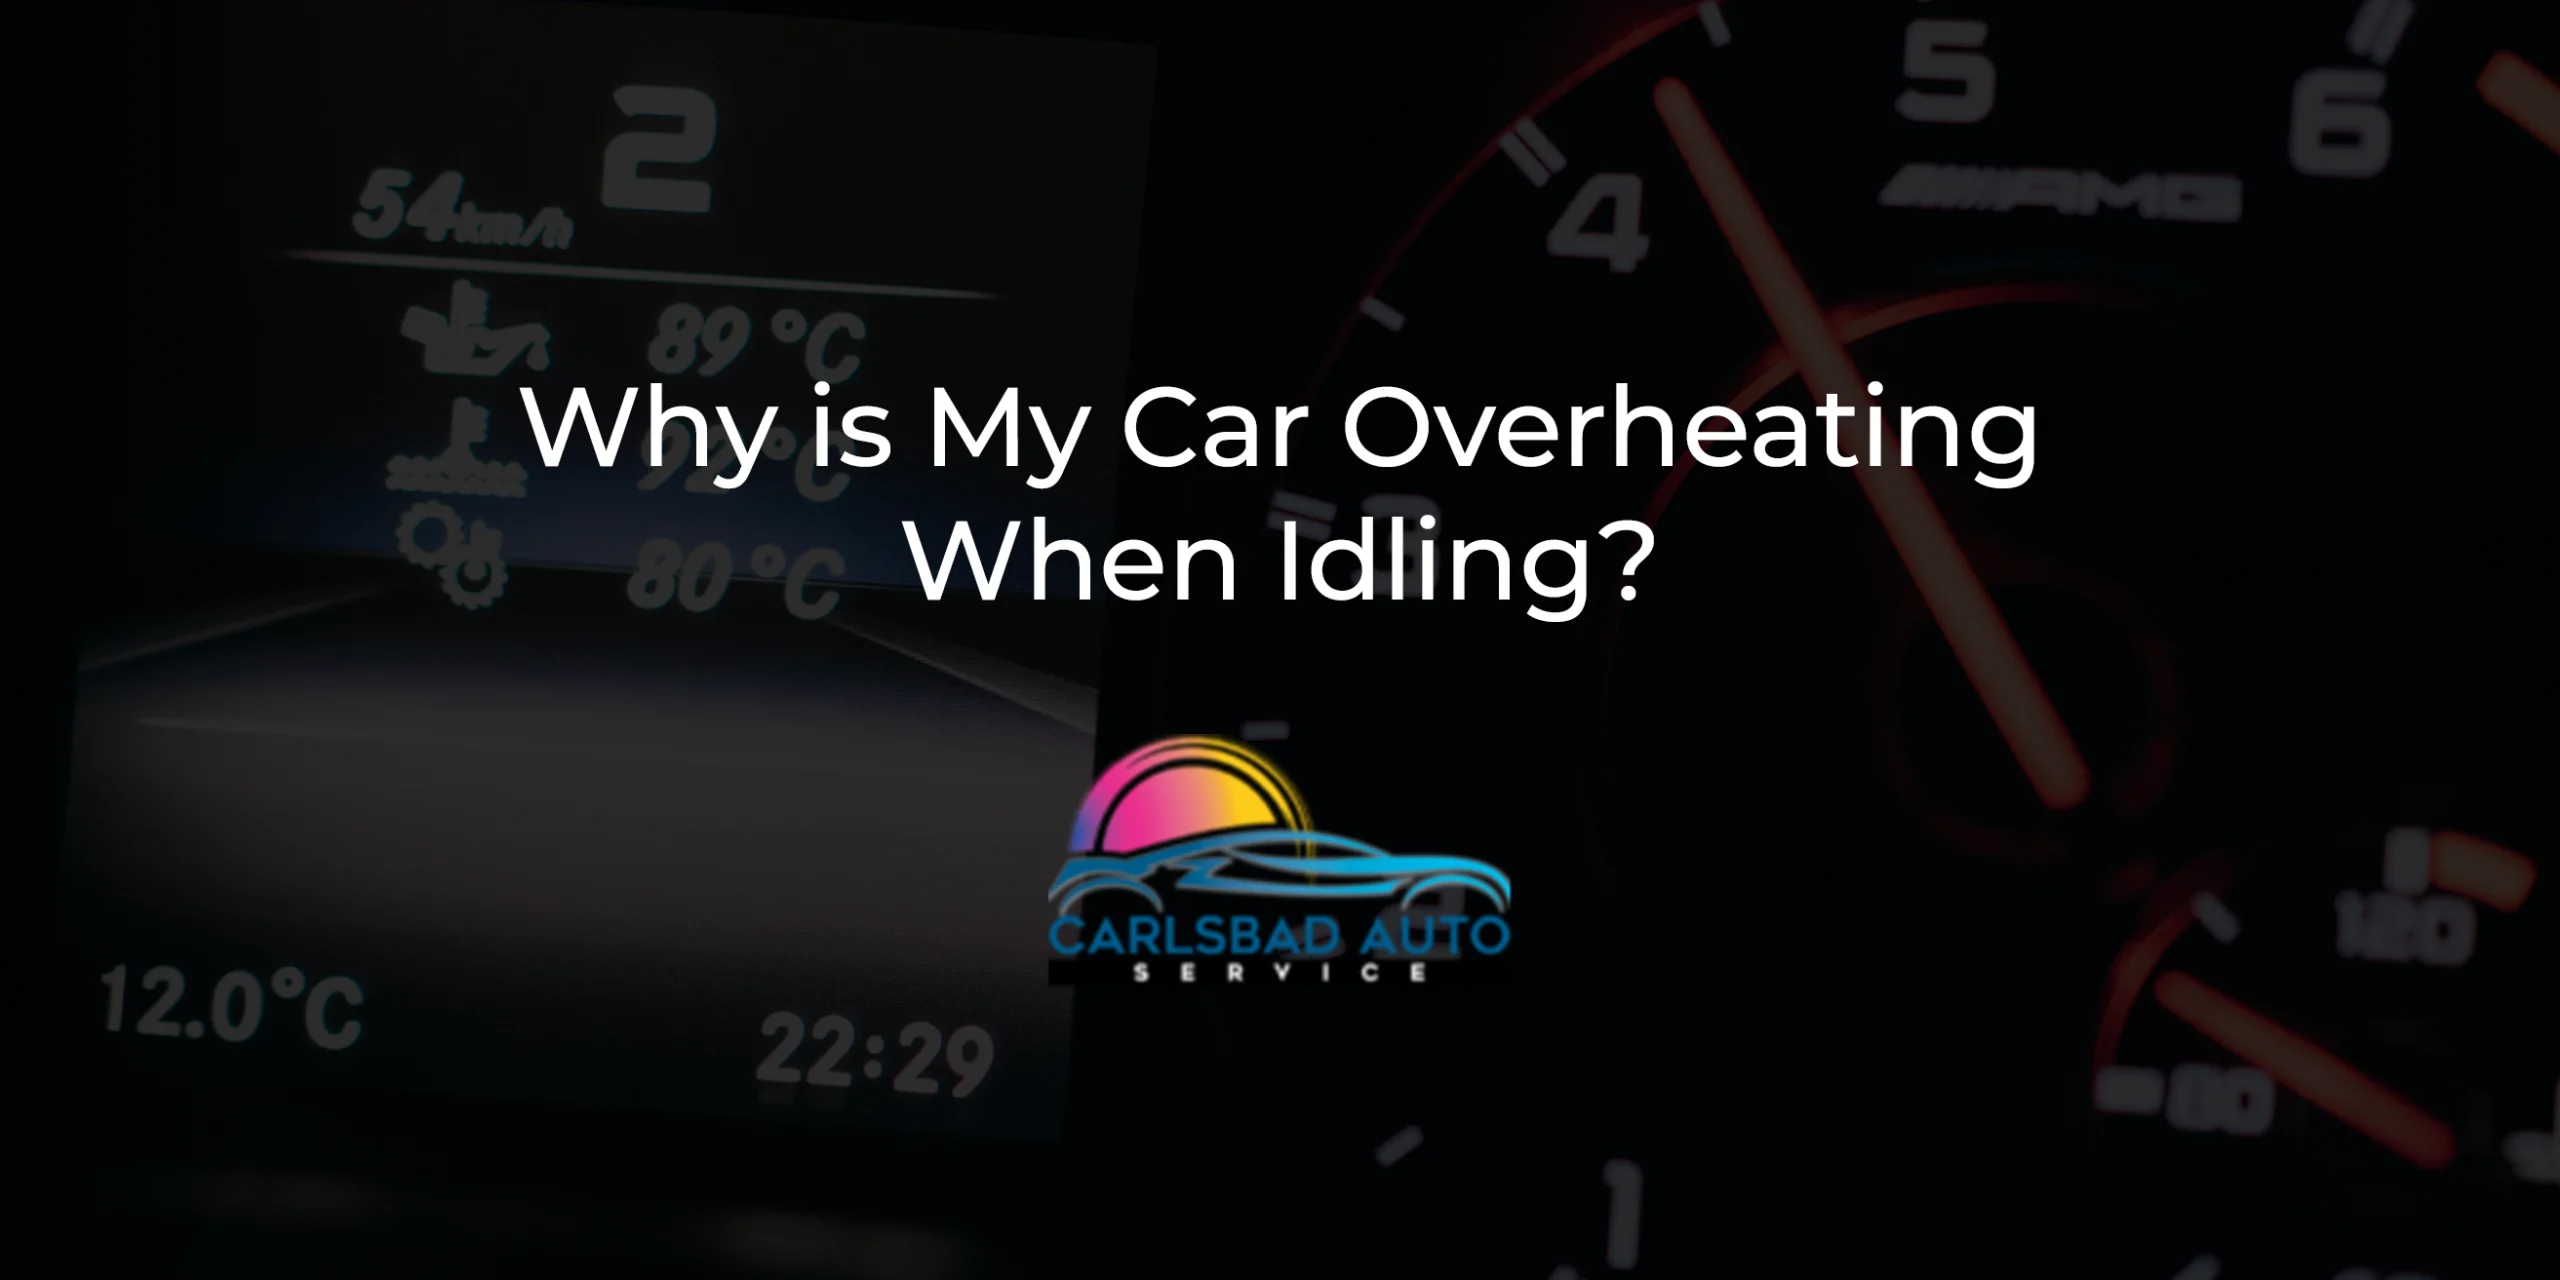 Why is My Car Overheating When Idling?